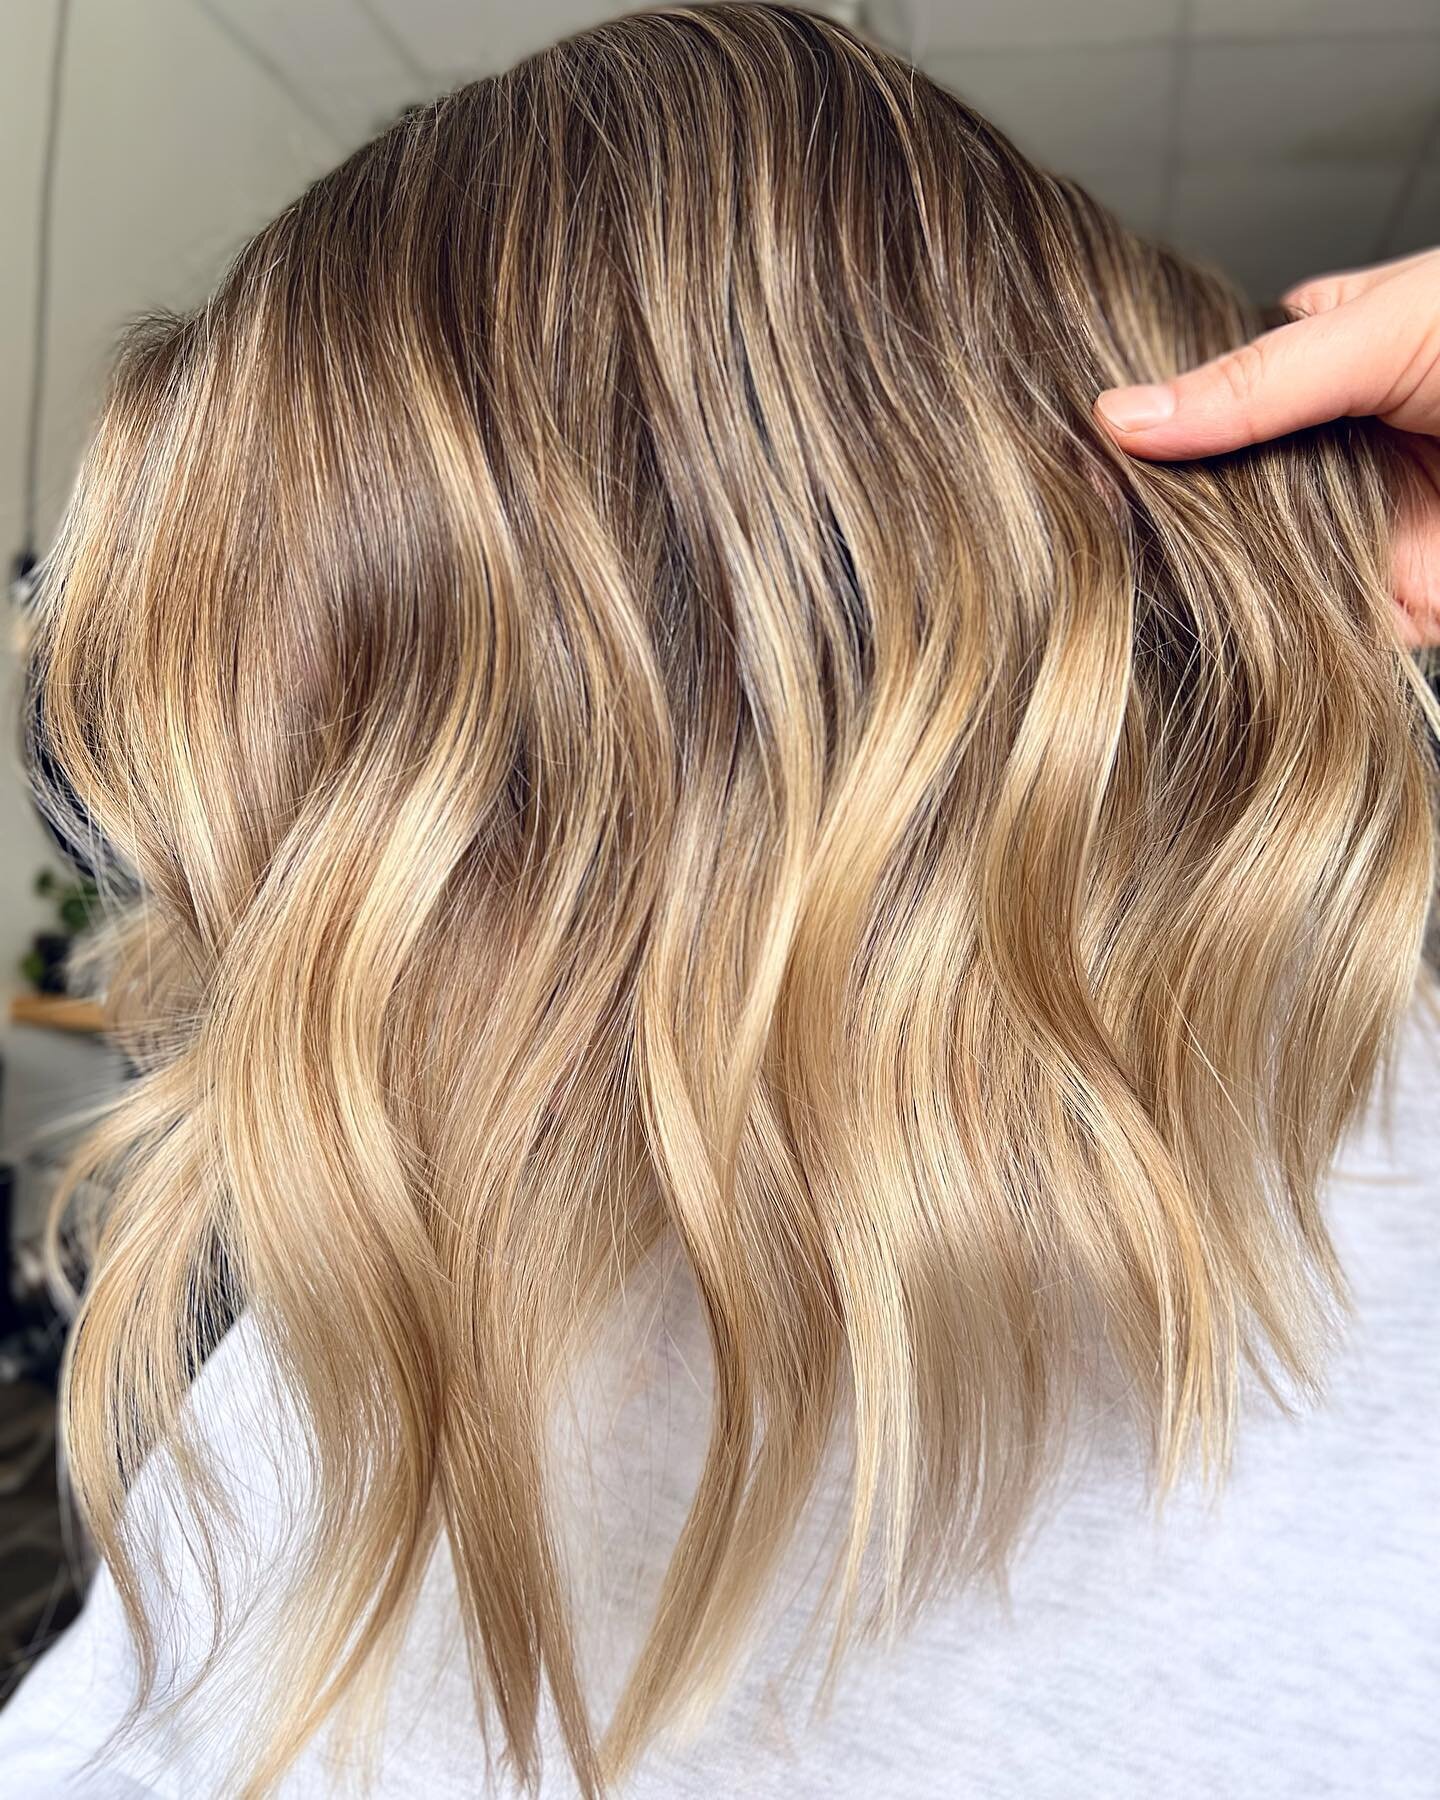 There&rsquo;s nothing better than a successful first appointment + a happy new client✨

Hair @manegirljilly 
Babe @sstevens44 

#niagarahairstylist #niagarahairsalon #niagarahair #highlightedhair #hairhighlights #blondehighlights #champagneblonde #ha